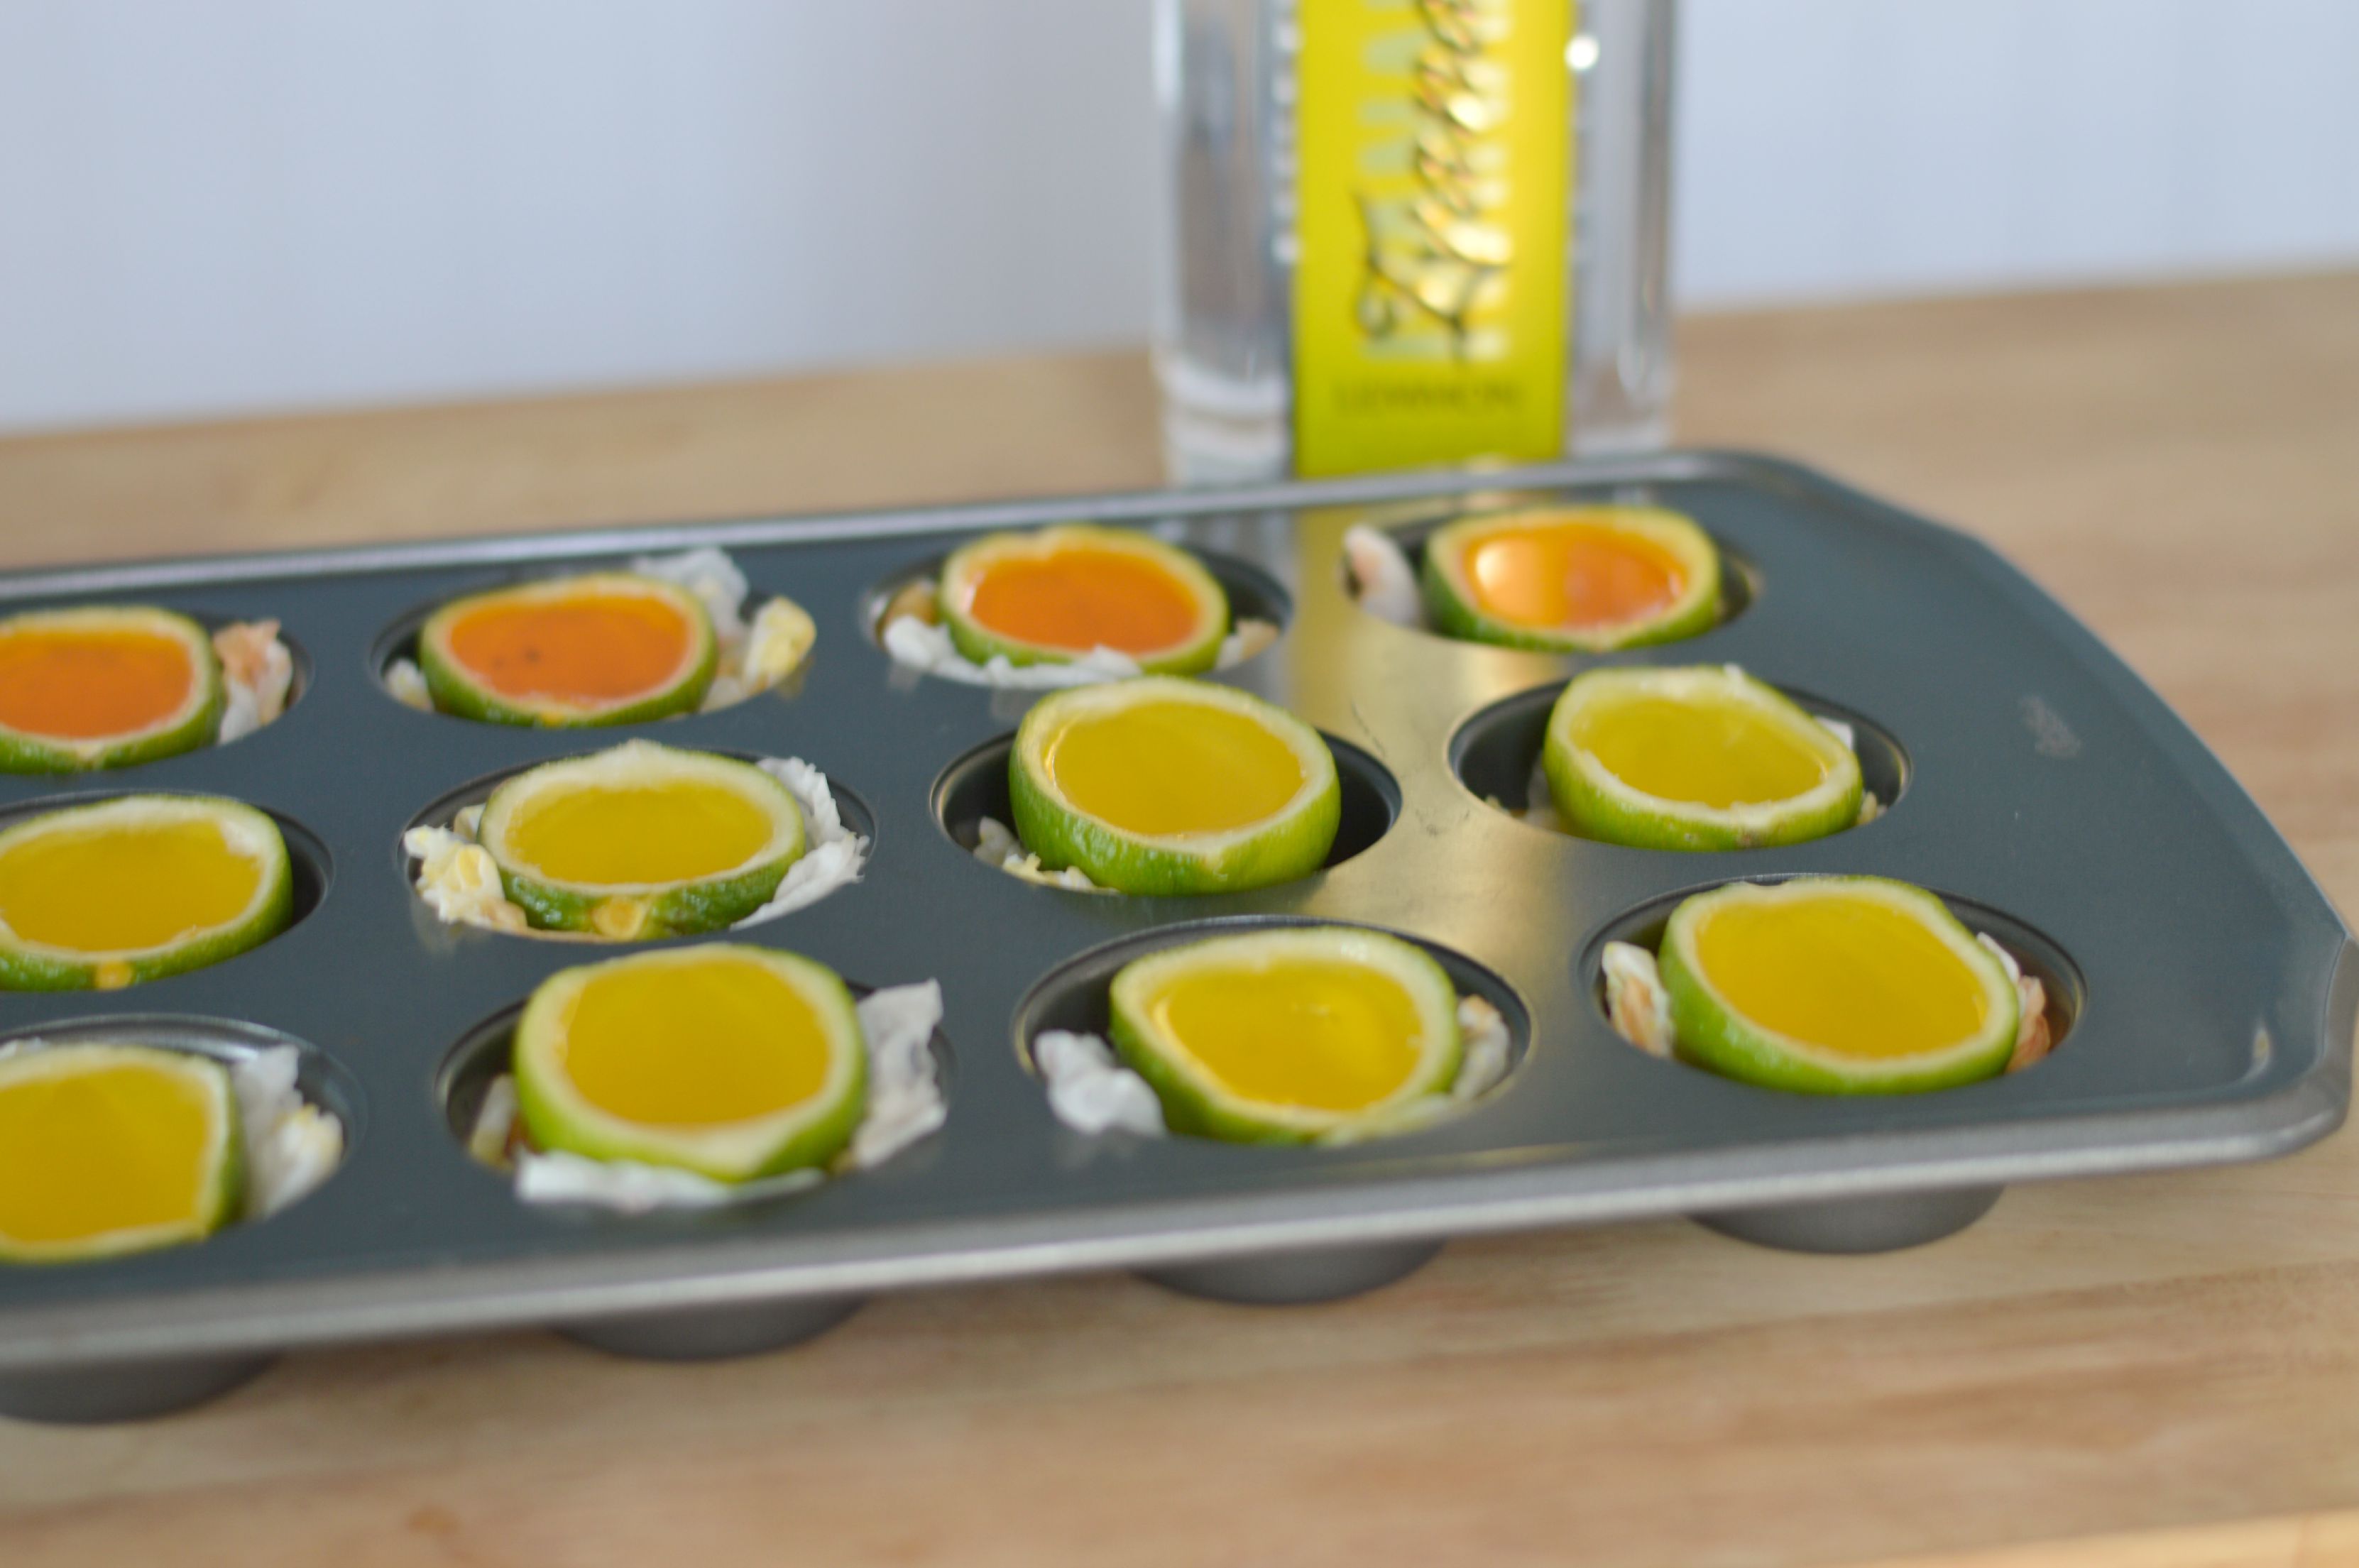 How to make Jell-O Shots in Lime Peels